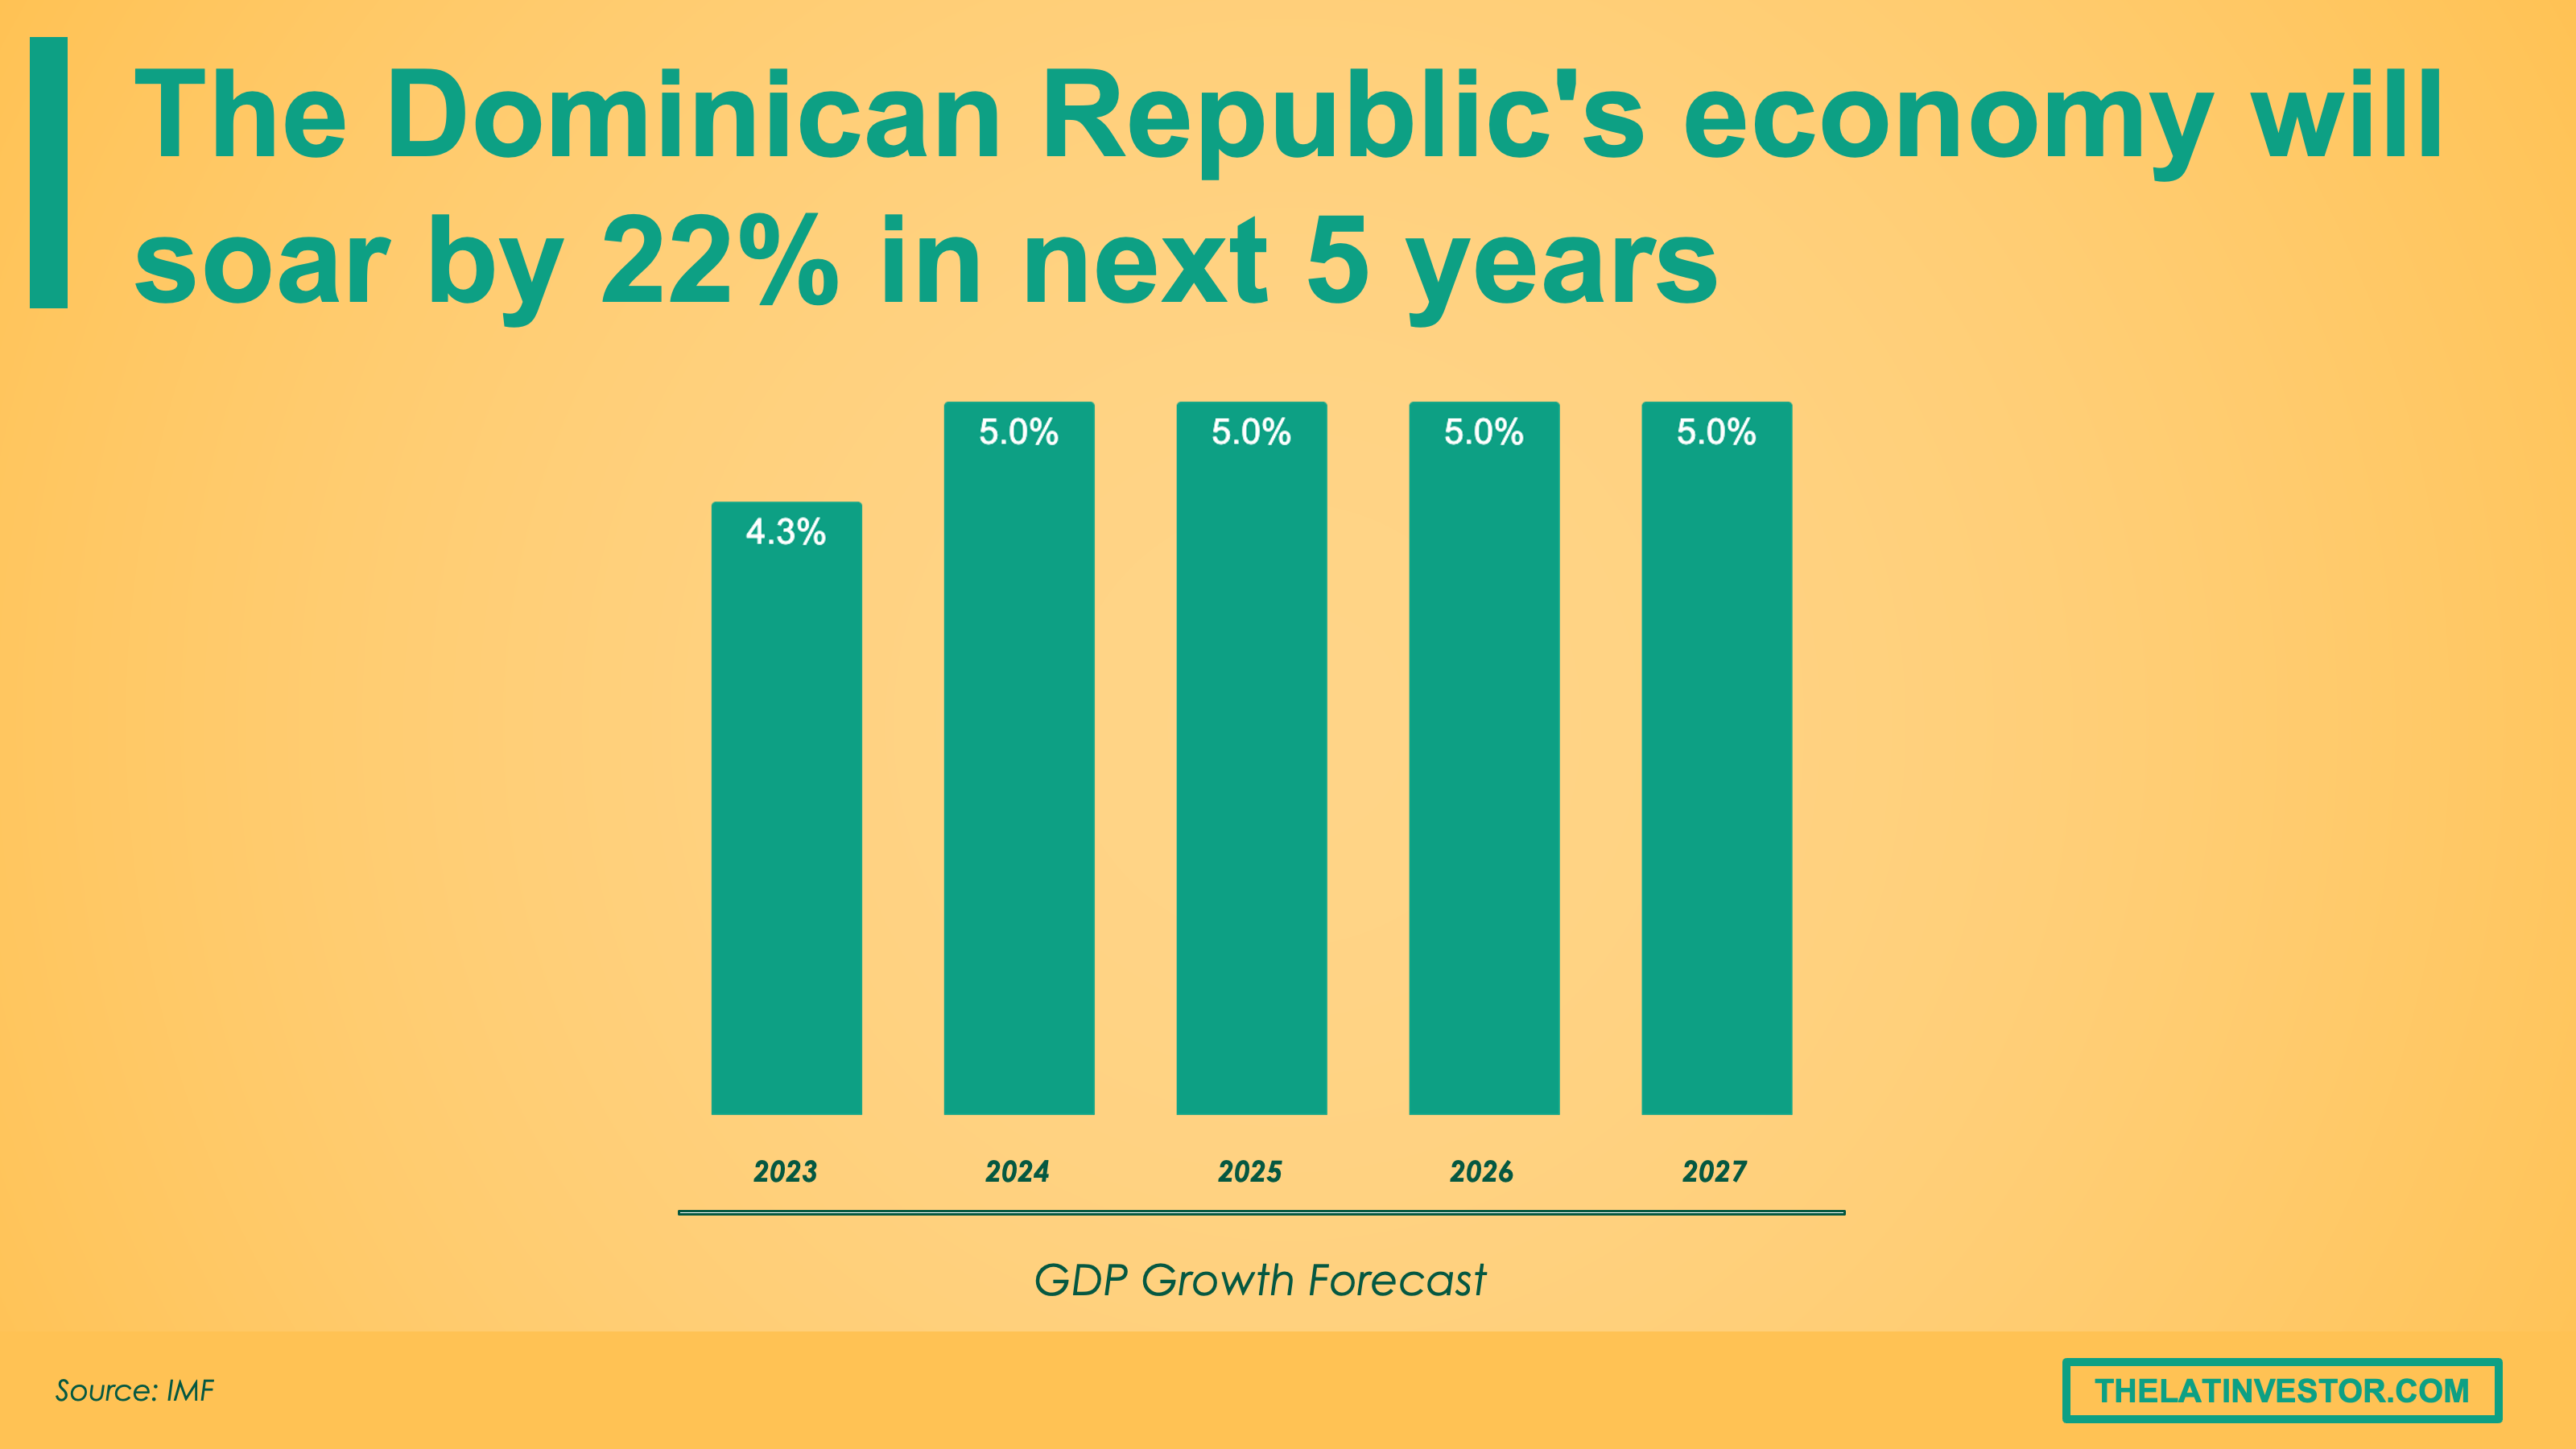 The Dominican Republic gdp growth